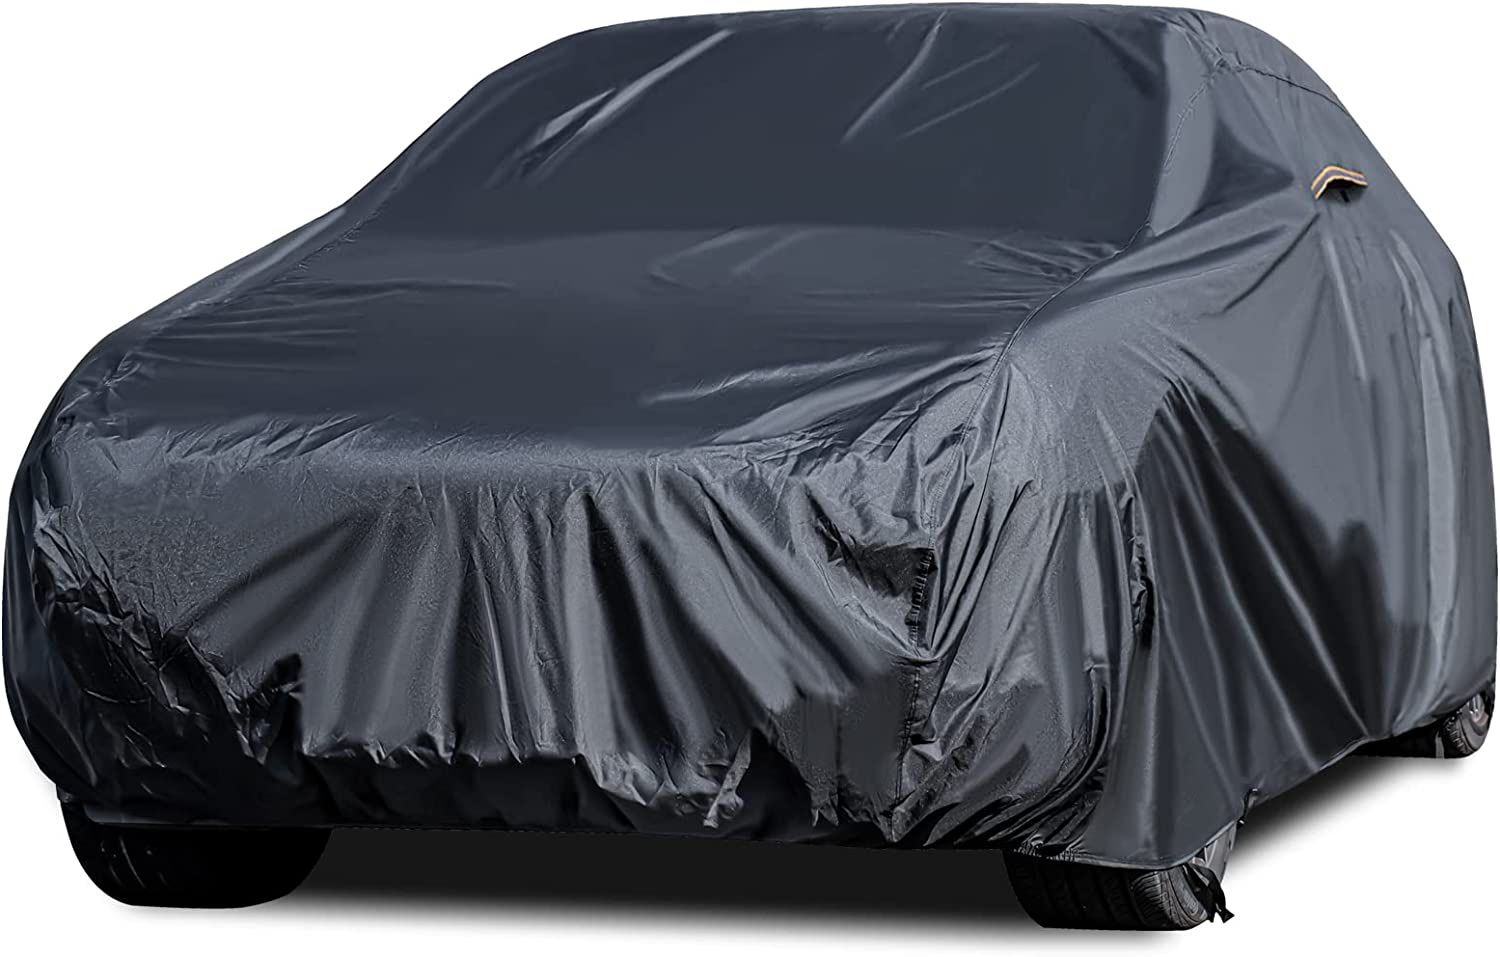 Car Cover Premium Black,Size: Fit SUV to Length to 191-201 inch,  Full Exterior Covers Protection UV Sun Snow Dust Storm Resistant,Vehiclecover SUV Pr